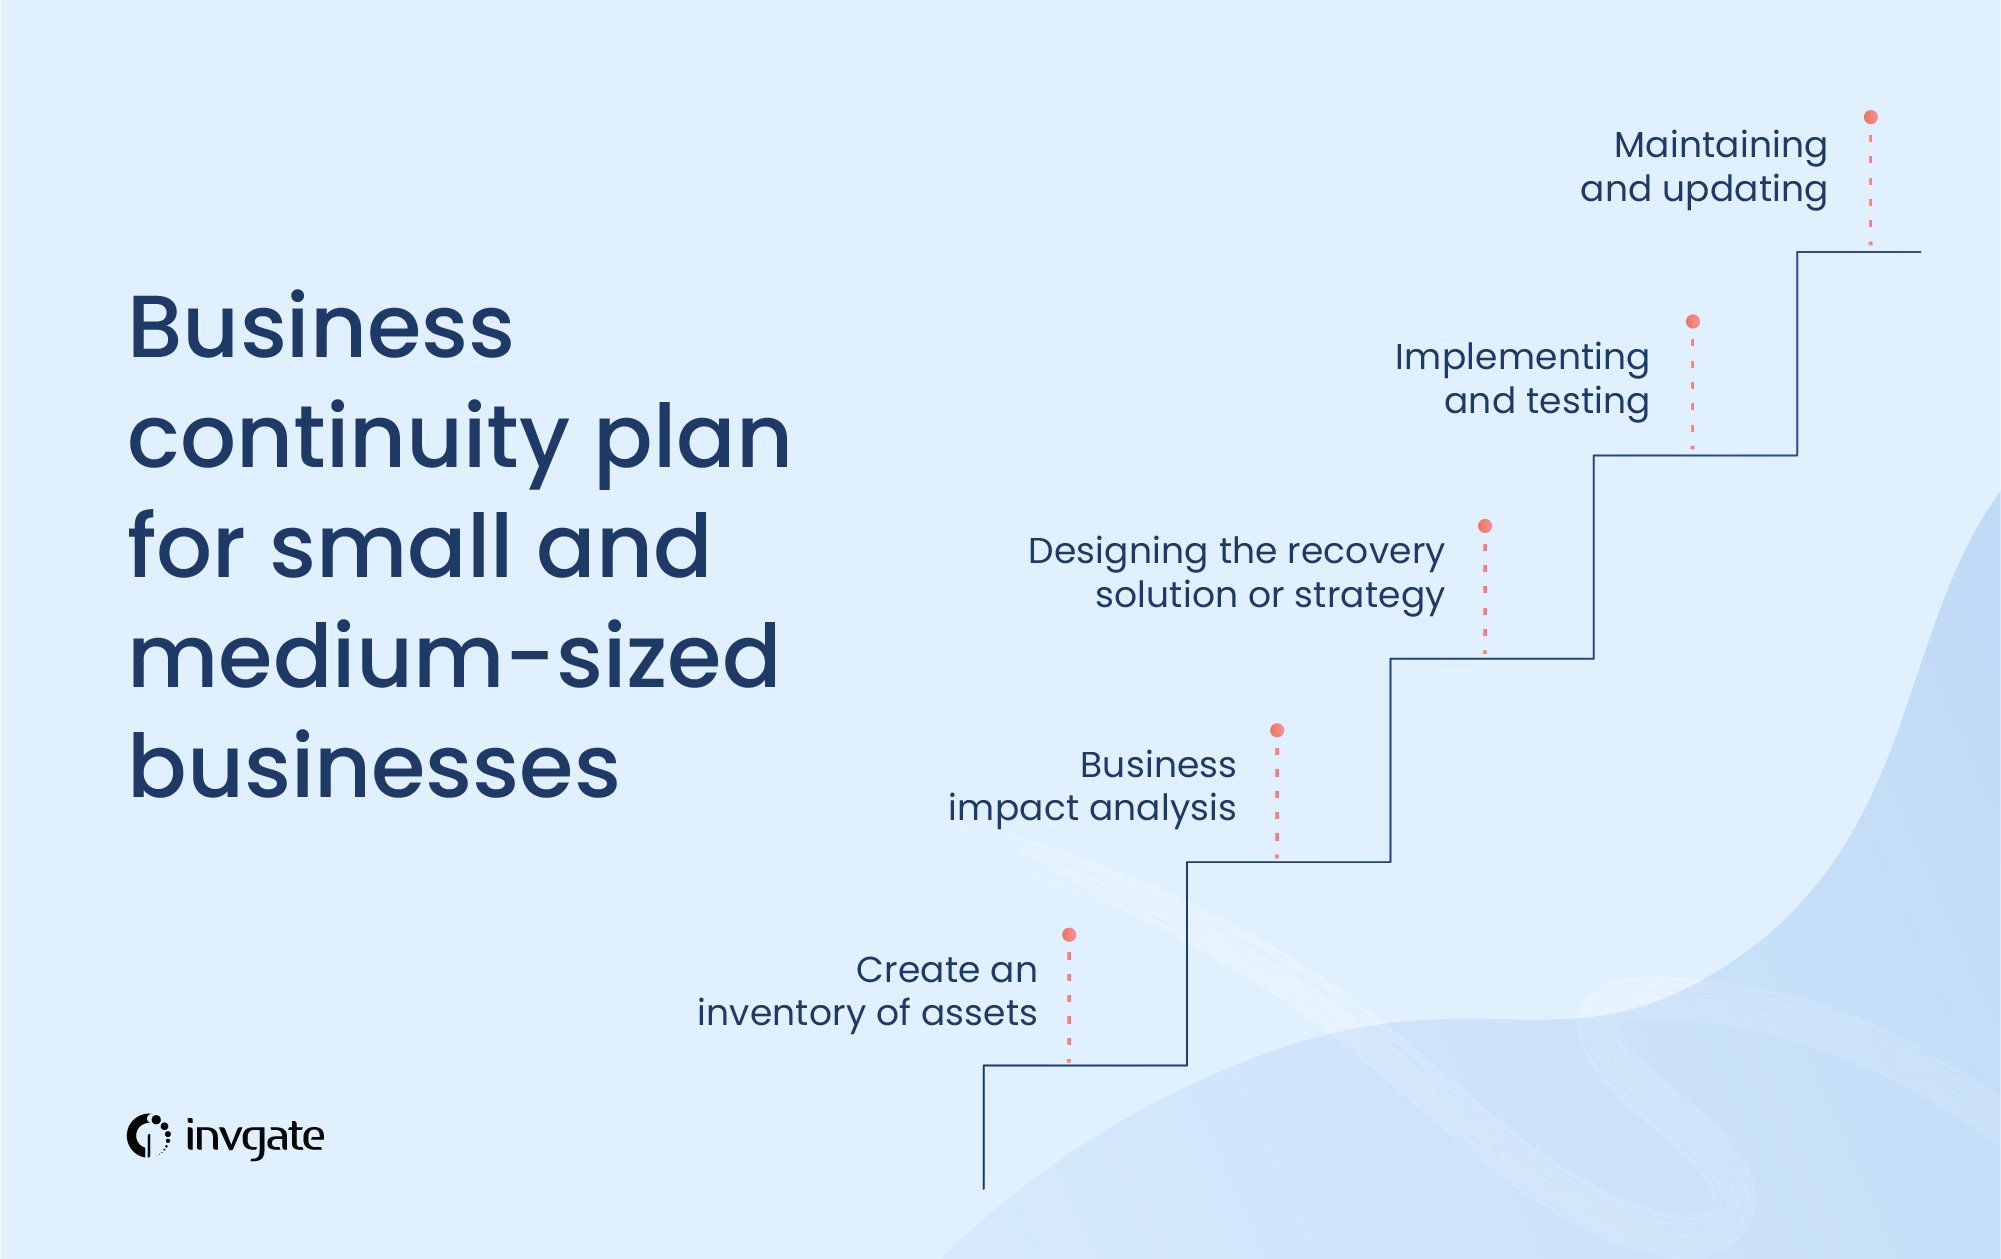 If you’re planning on implementing a business continuity plan, here are five key steps to follow.